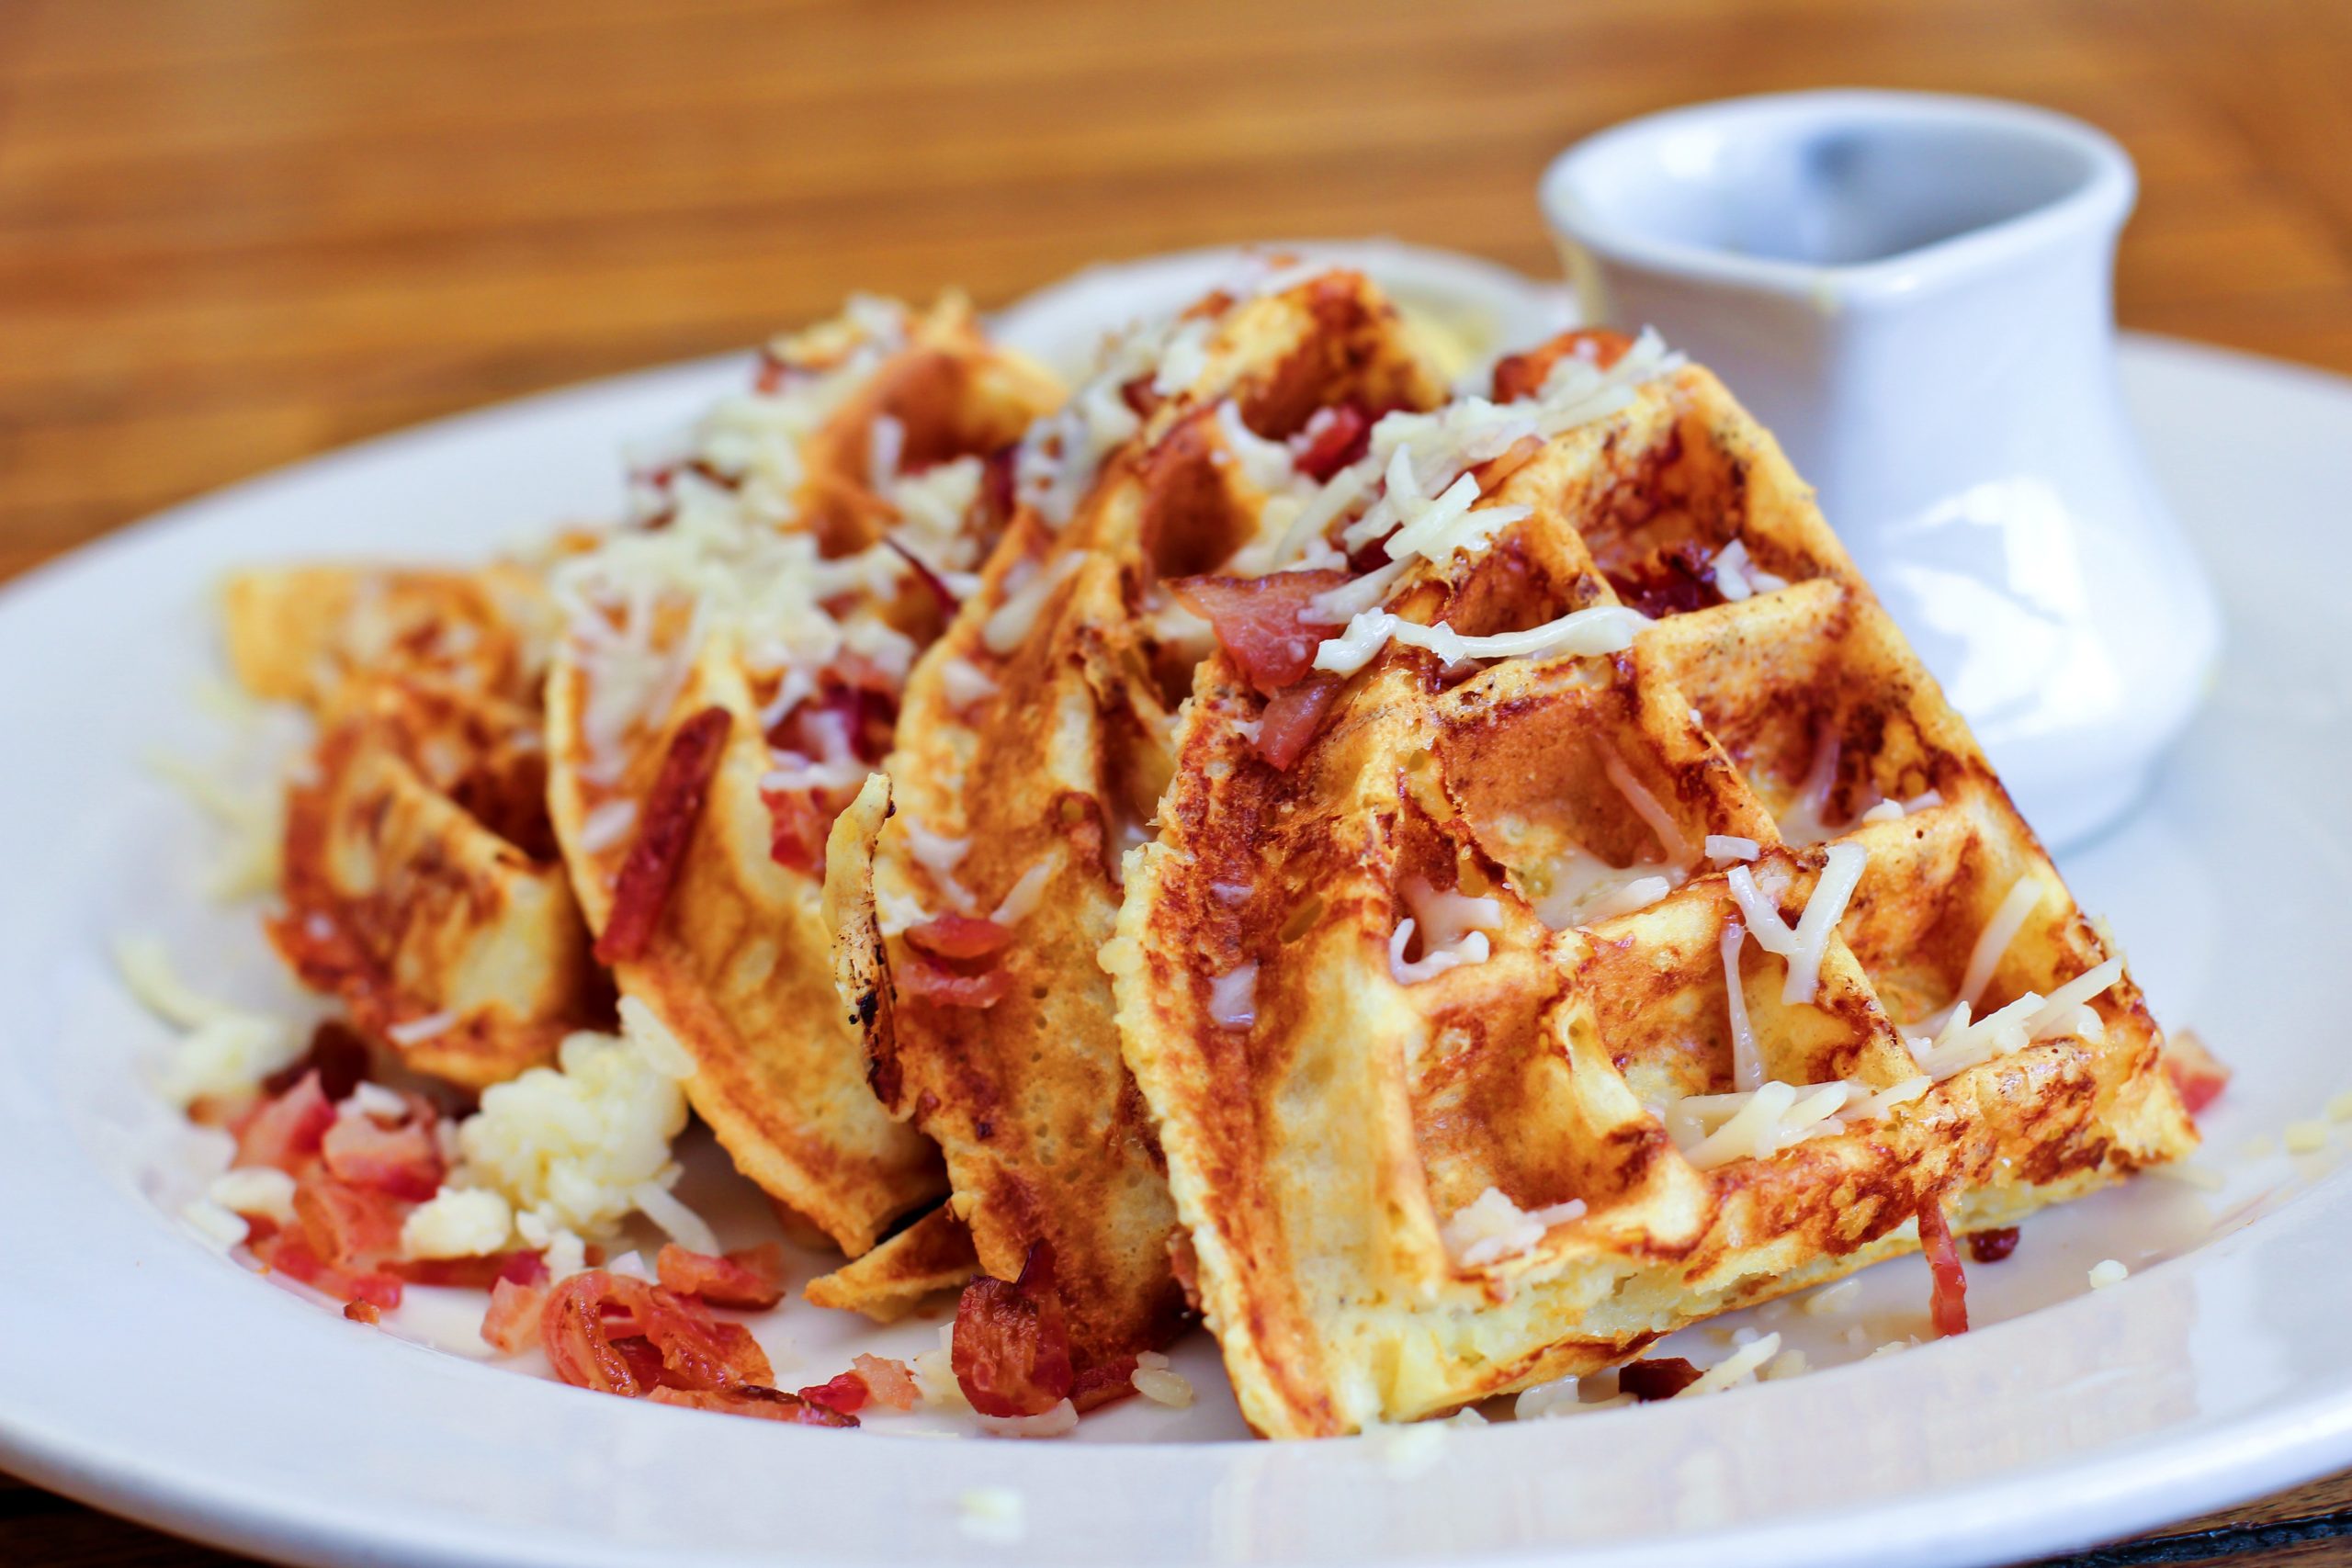 Grits n’ Bits Waffles: All the Deliciousness in One Place